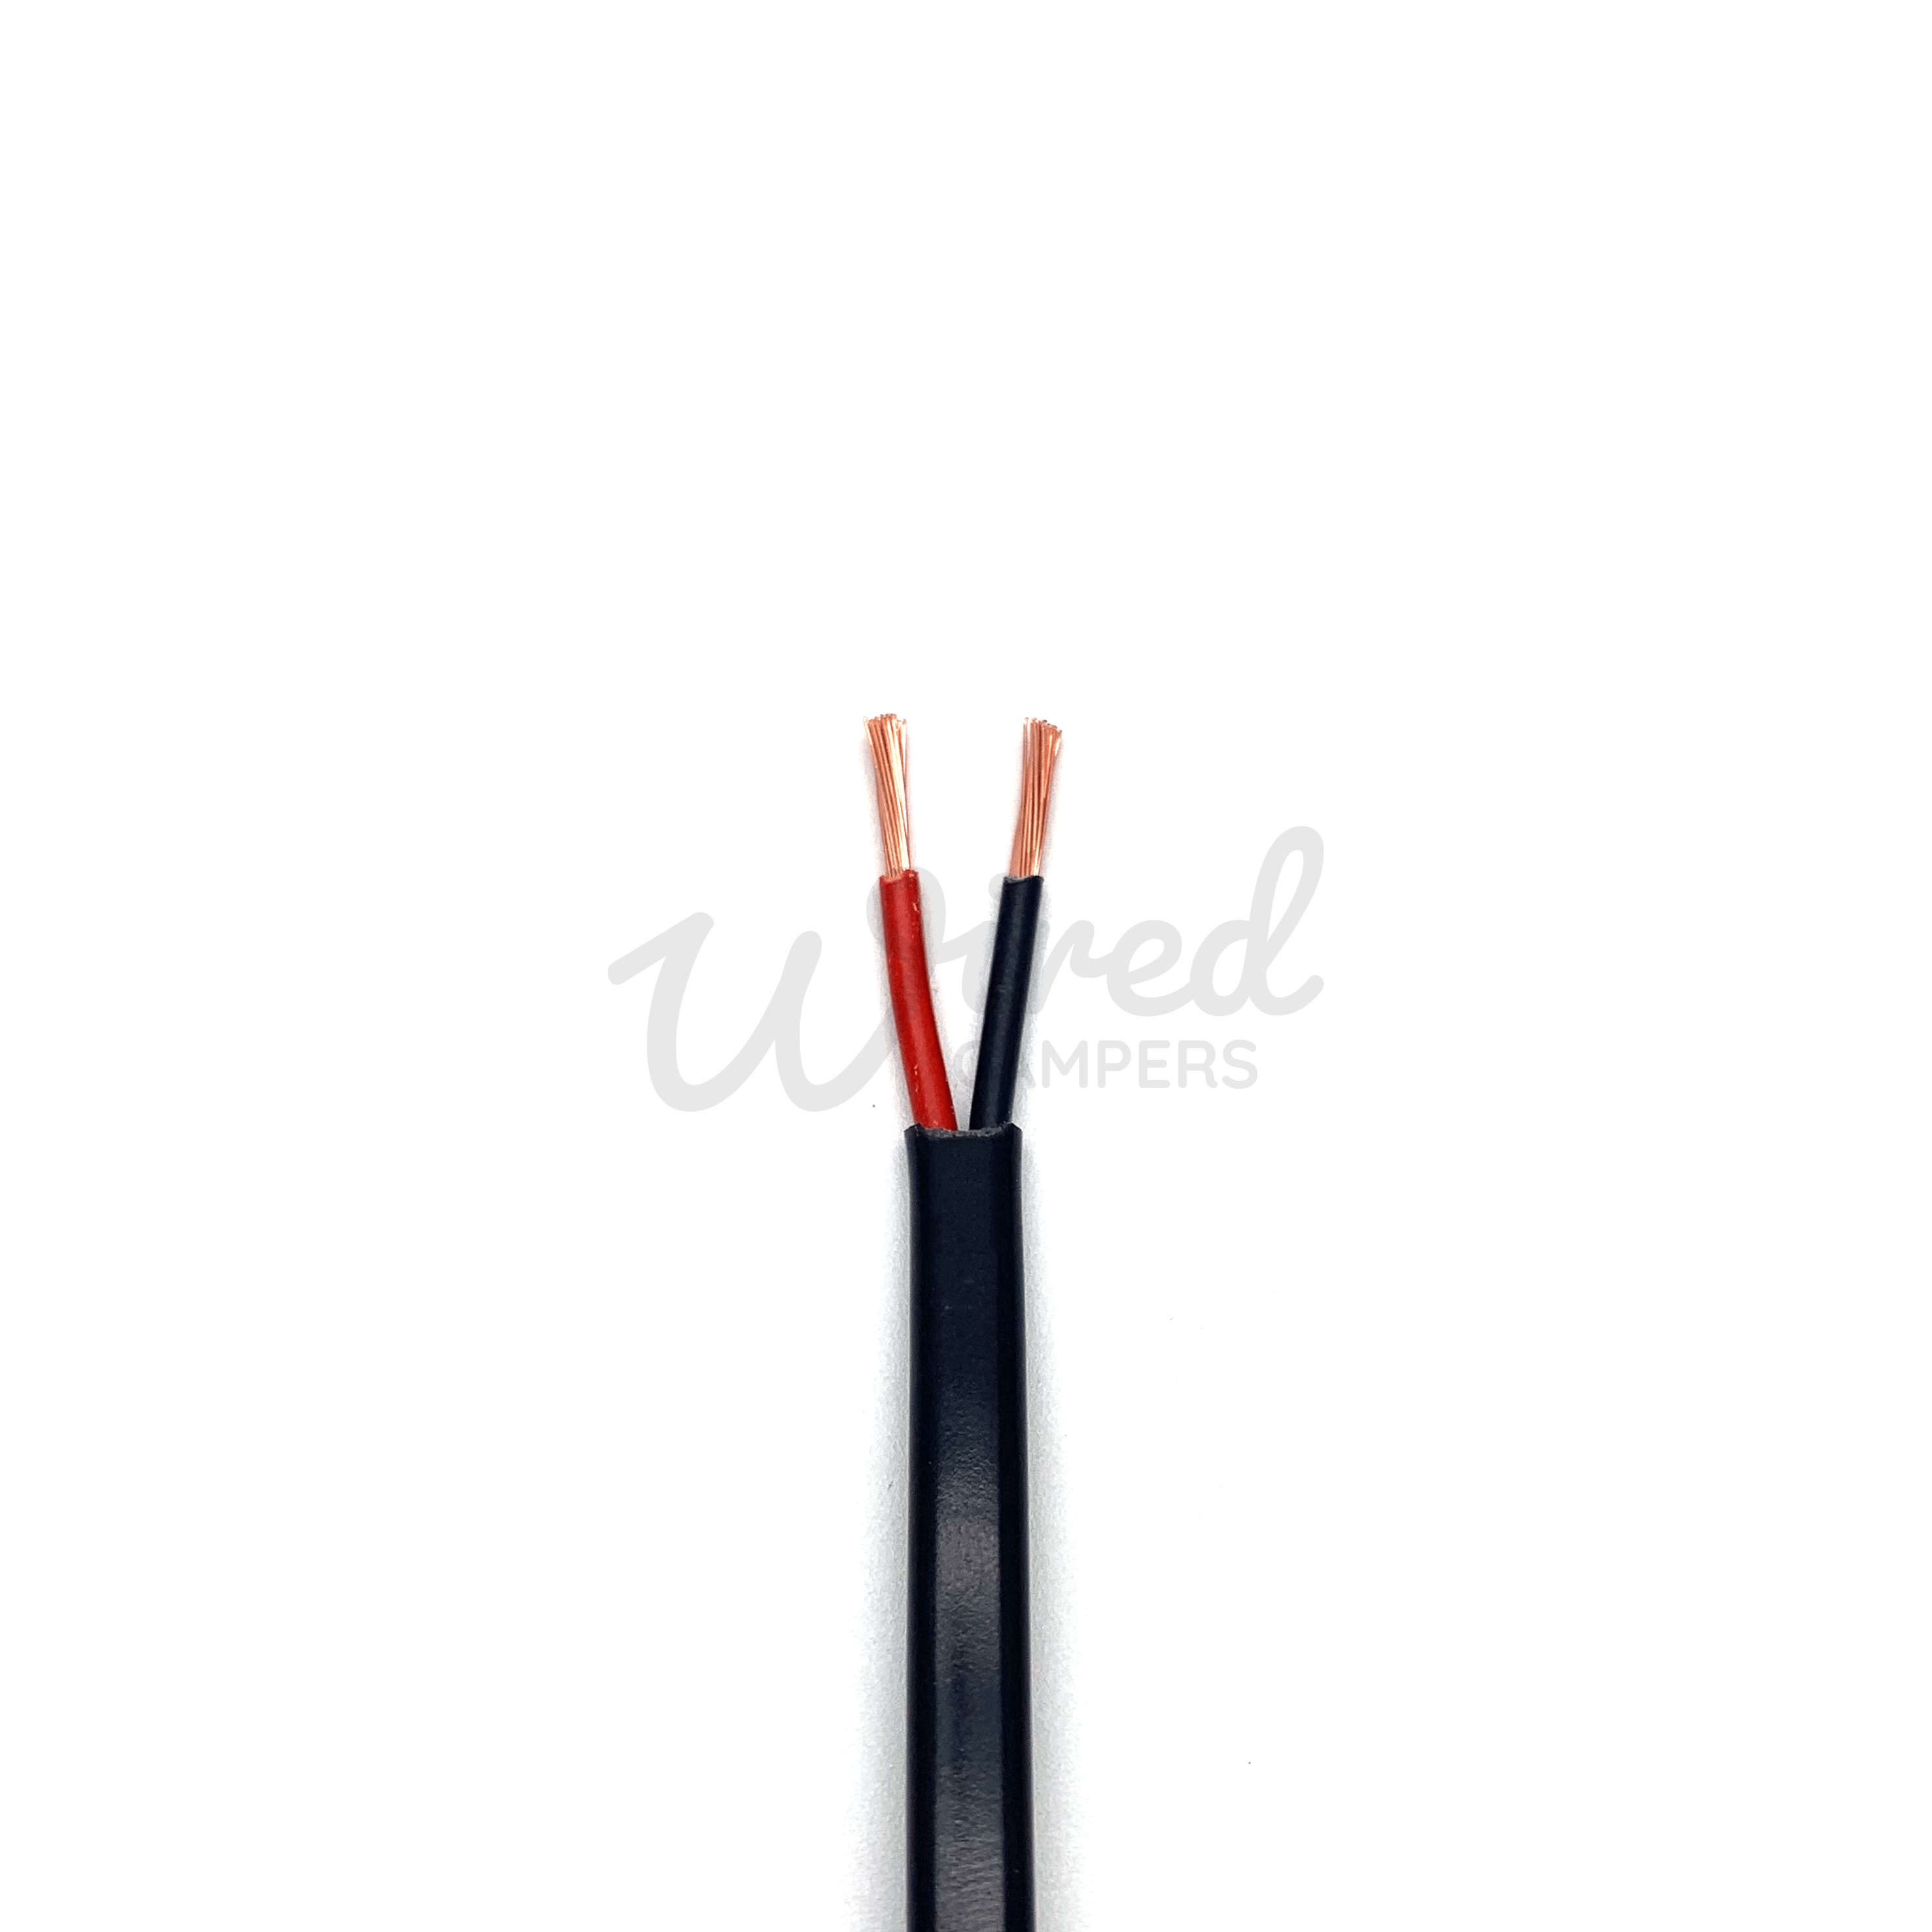 Wired Campers Limited 10M - 1.5mm2 21A Thin Wall Twin Core Flat Automotive Camper Cable